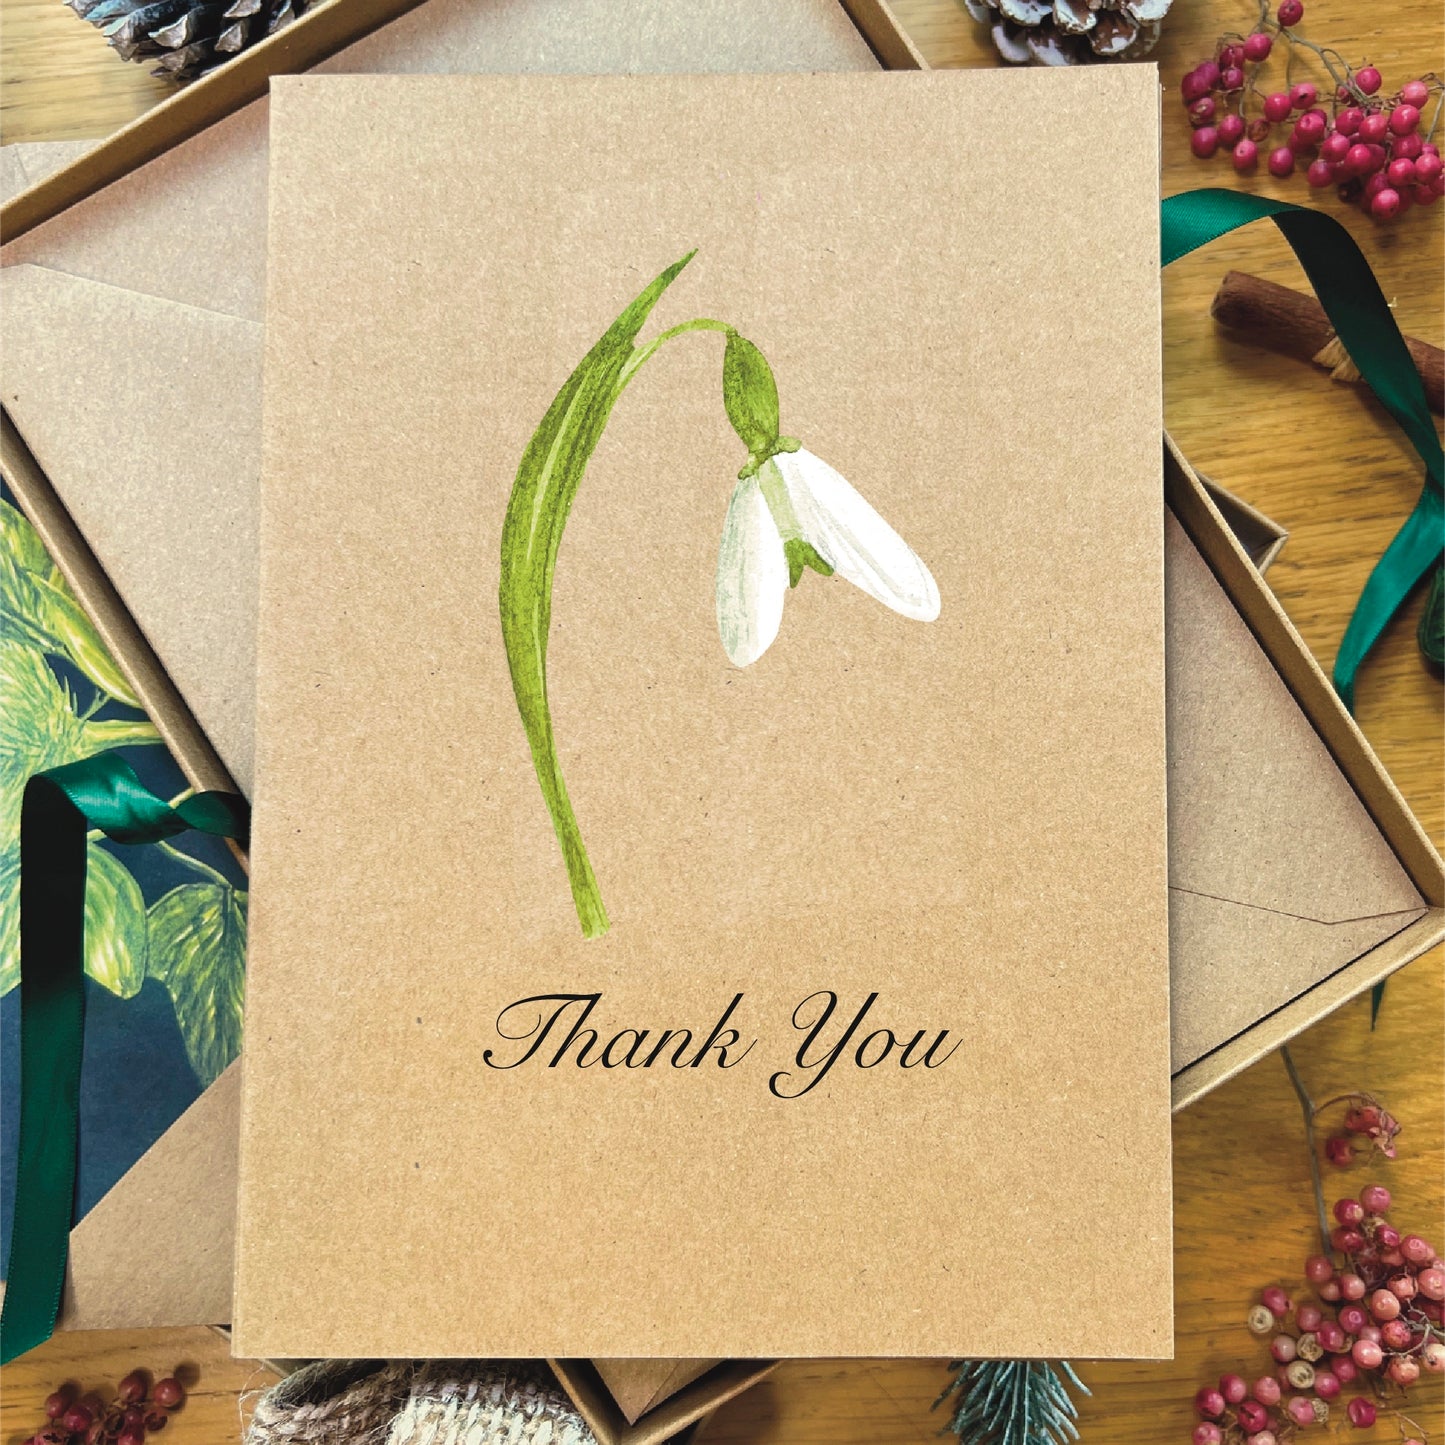 Snowdrop painted in watercolour attached to a natural recycled blank greetings card, laying in a box with an illustrated inlay envelope 